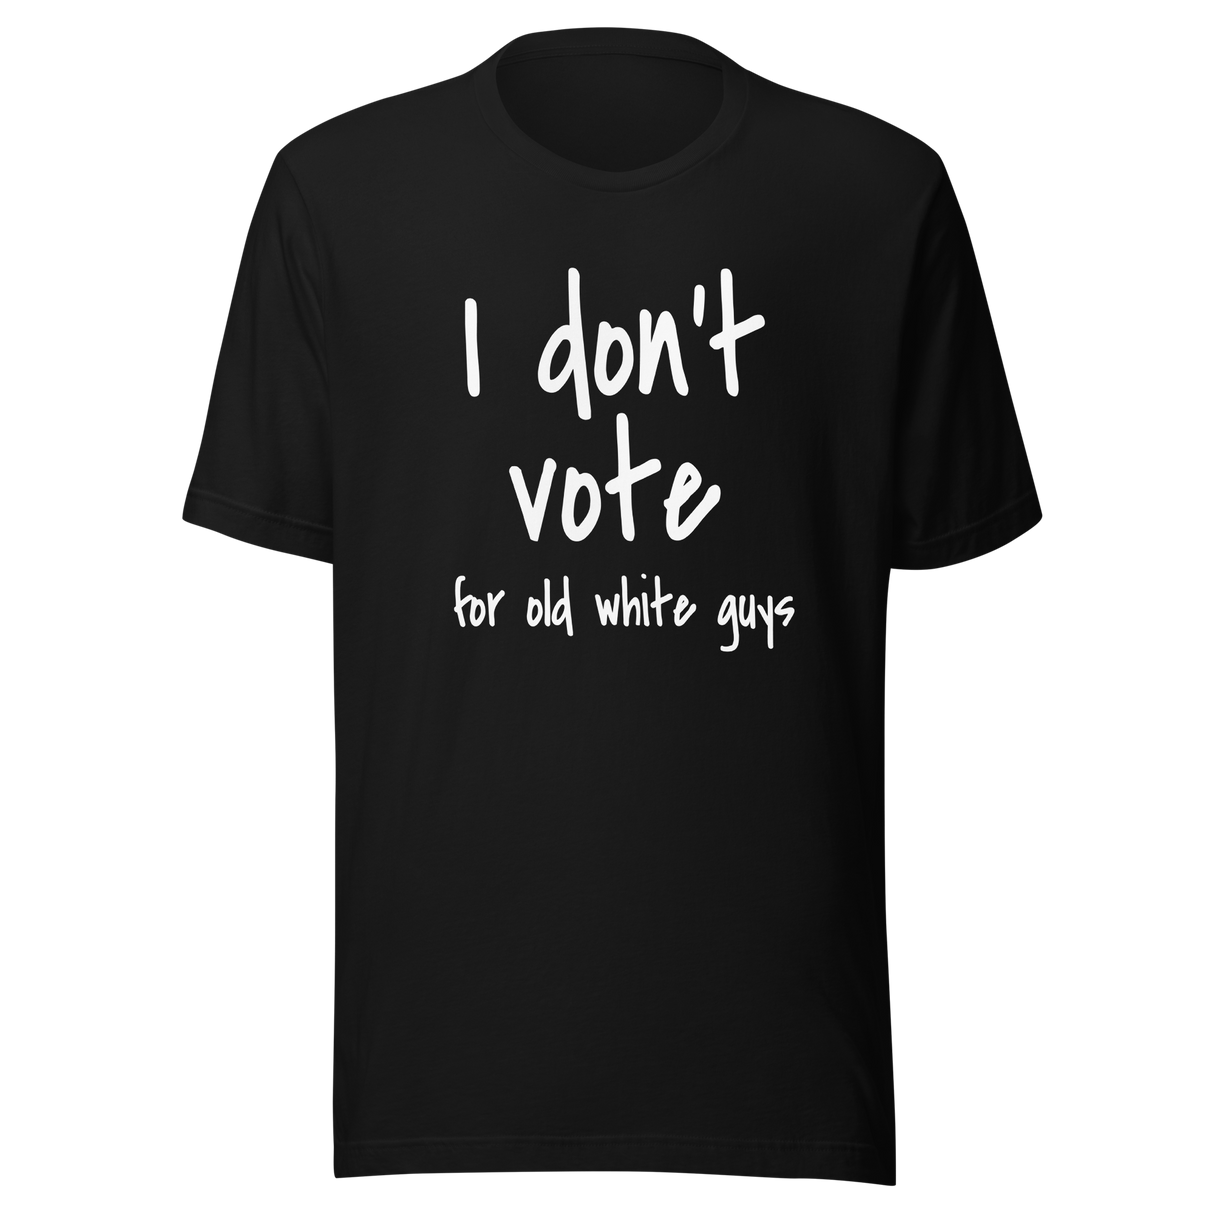 i-dont-vote-for-old-white-guys-vote-tee-white-guys-t-shirt-election-tee-t-shirt-tee#color_black